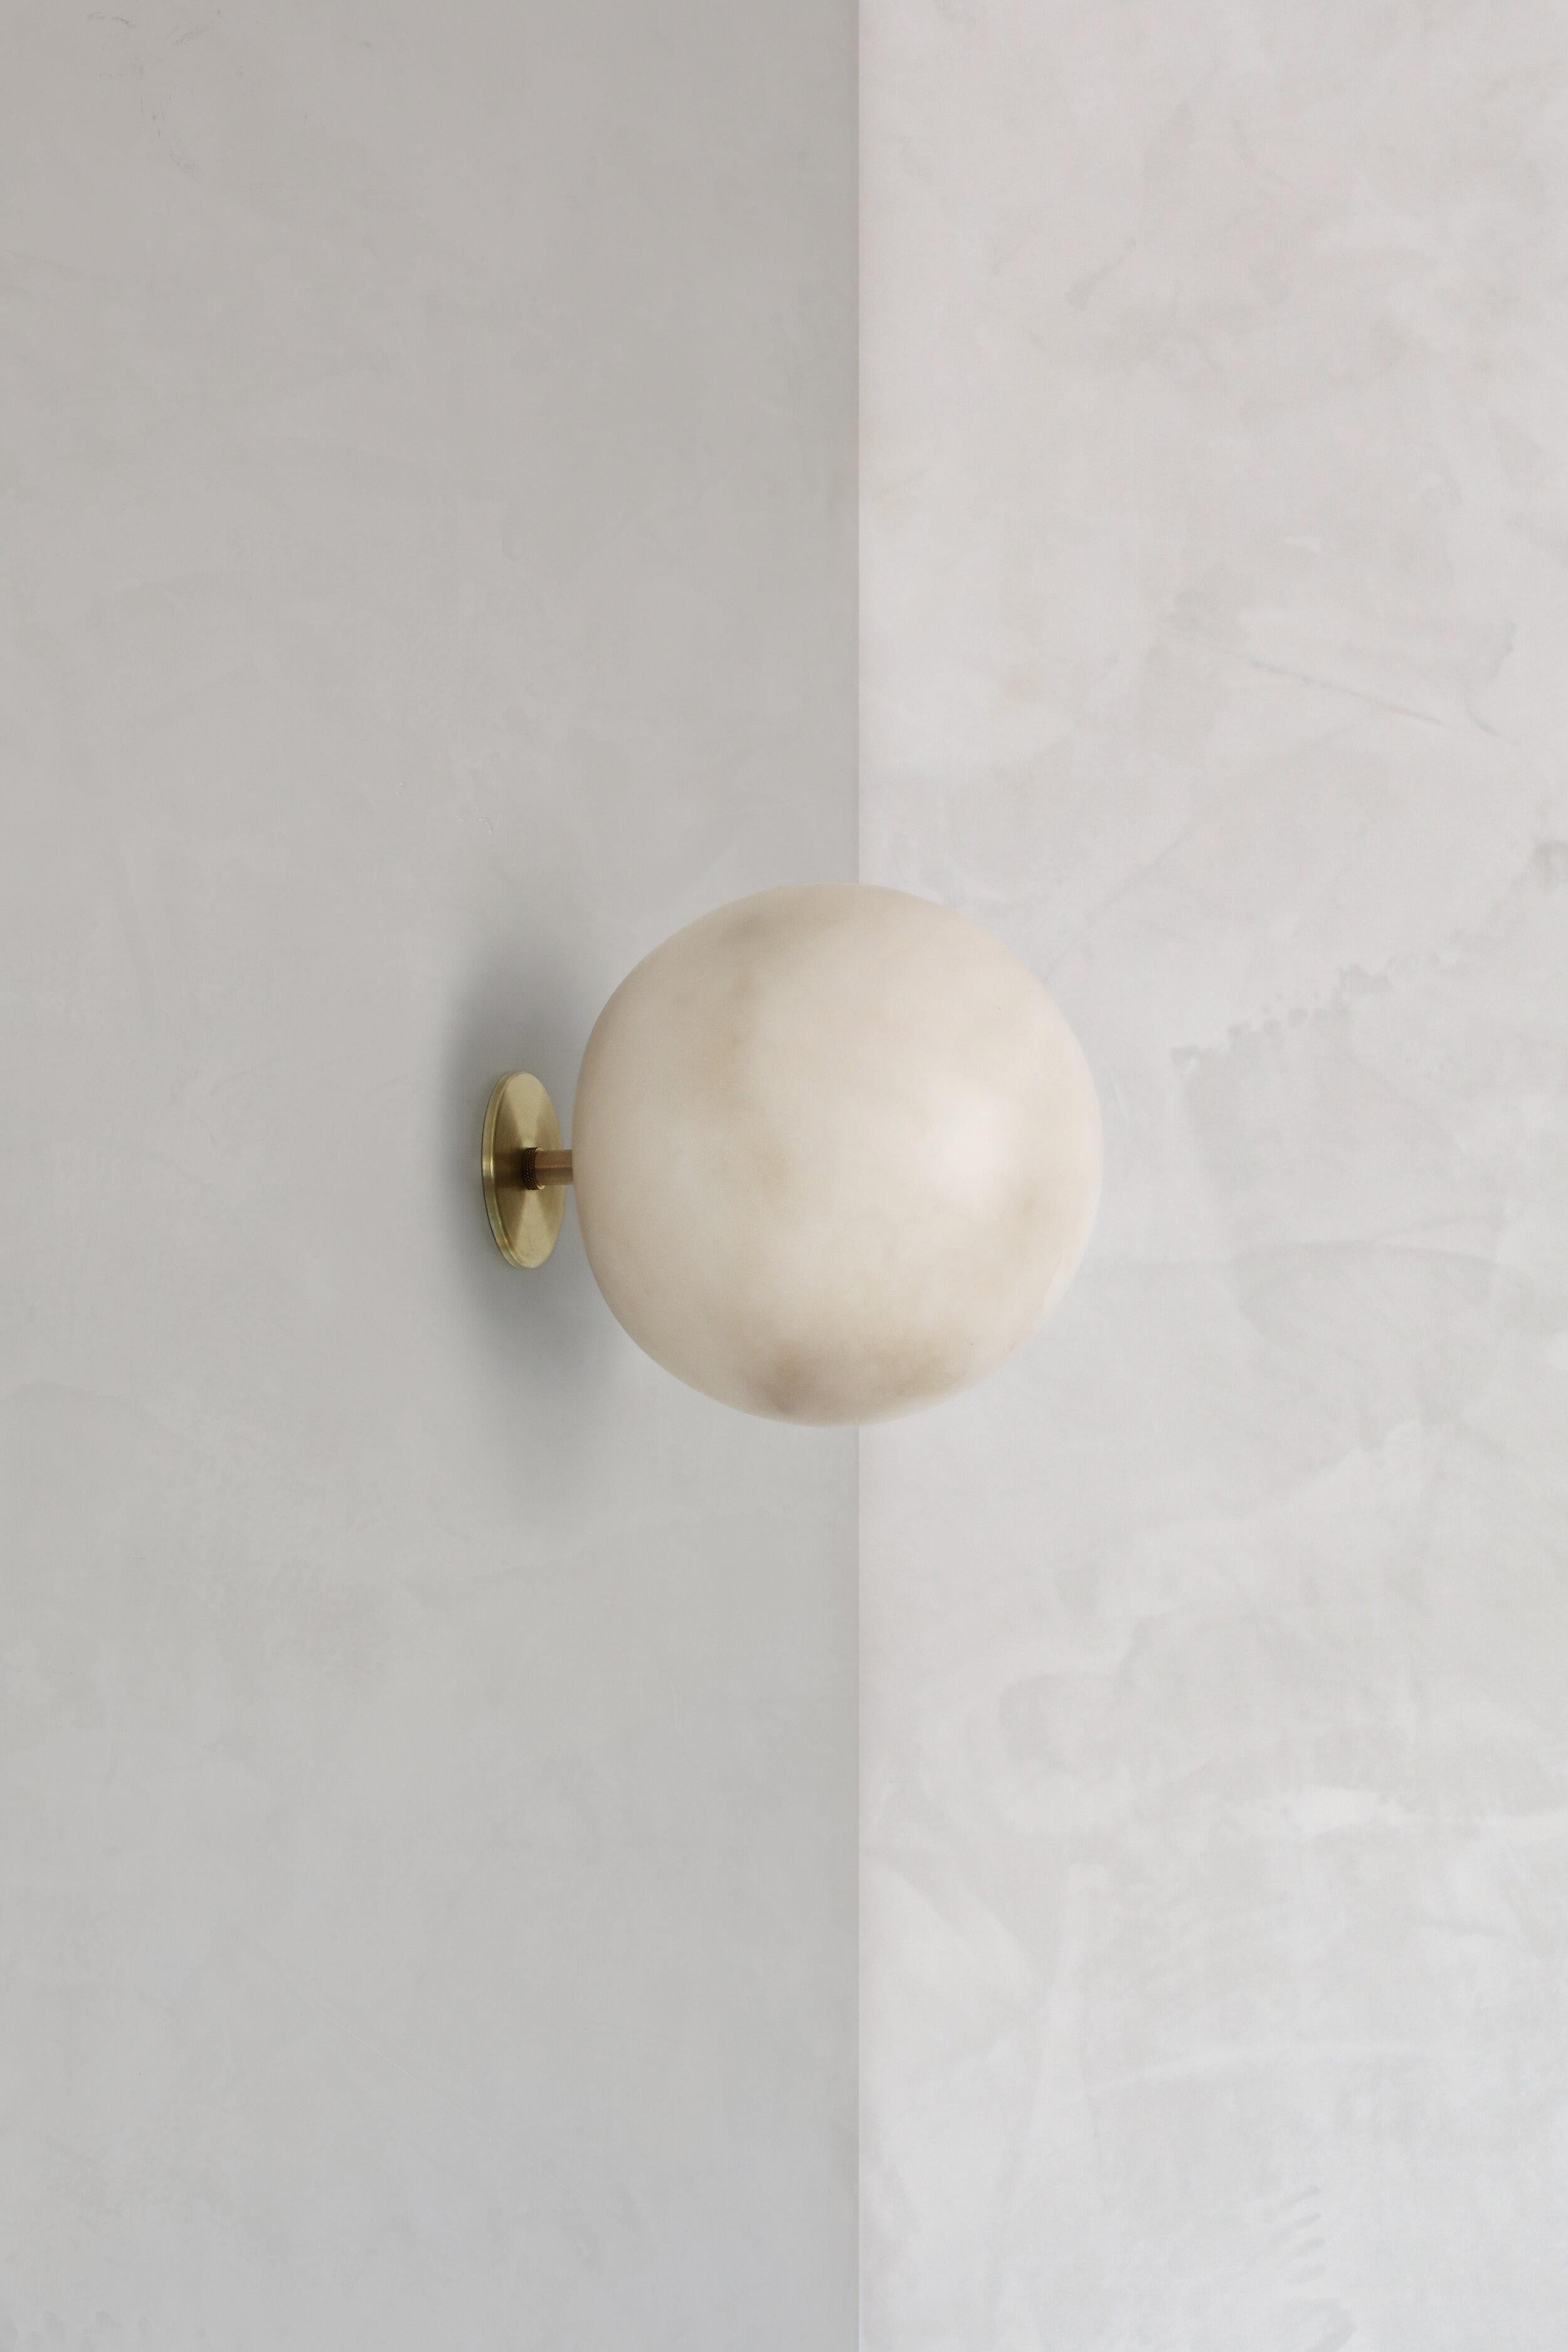 Planette Wall 16.5 Alabaster Wall Light by Contain
Dimensions: Ø 16.5 x H 20 cm.
Materials: Alabaster and brass.

Also available in different finishes and dimensions (Ø12 cm / Ø16,5 cm / Ø18cm). Please contact us.

All our lamps can be wired